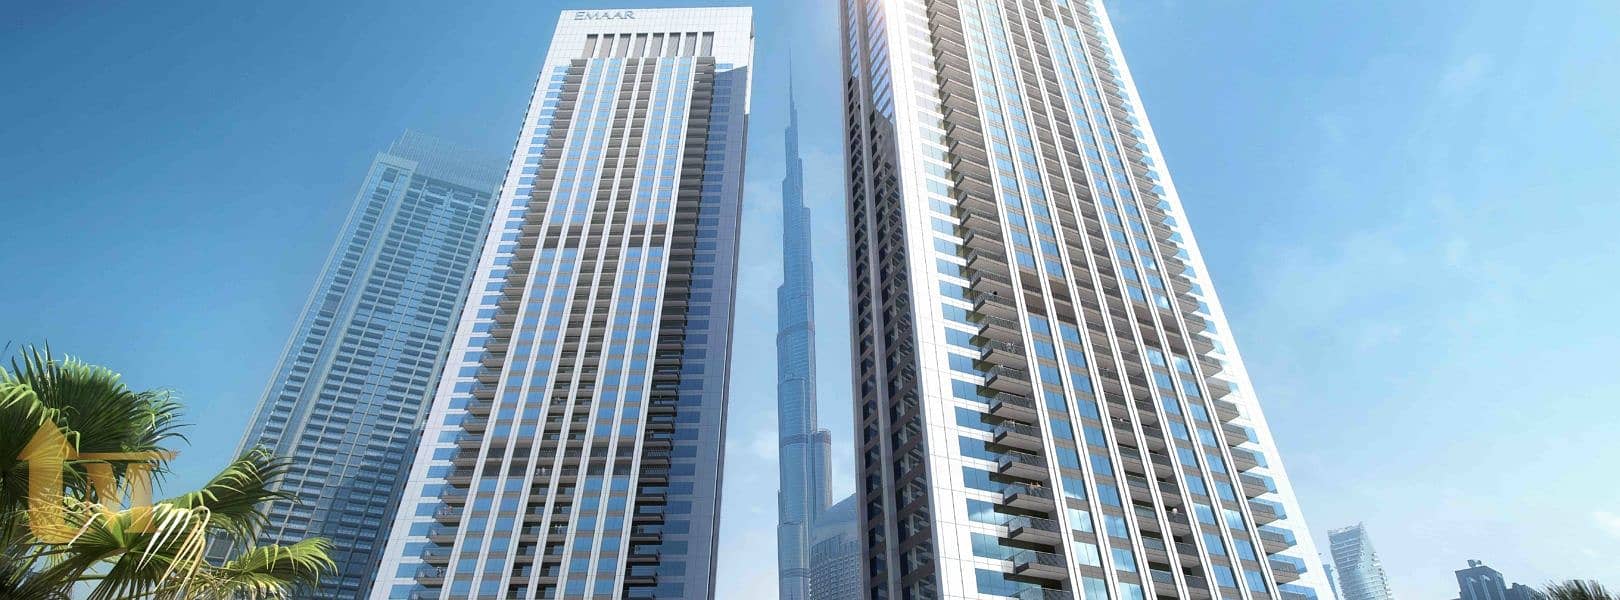 Units for sale in downtown views